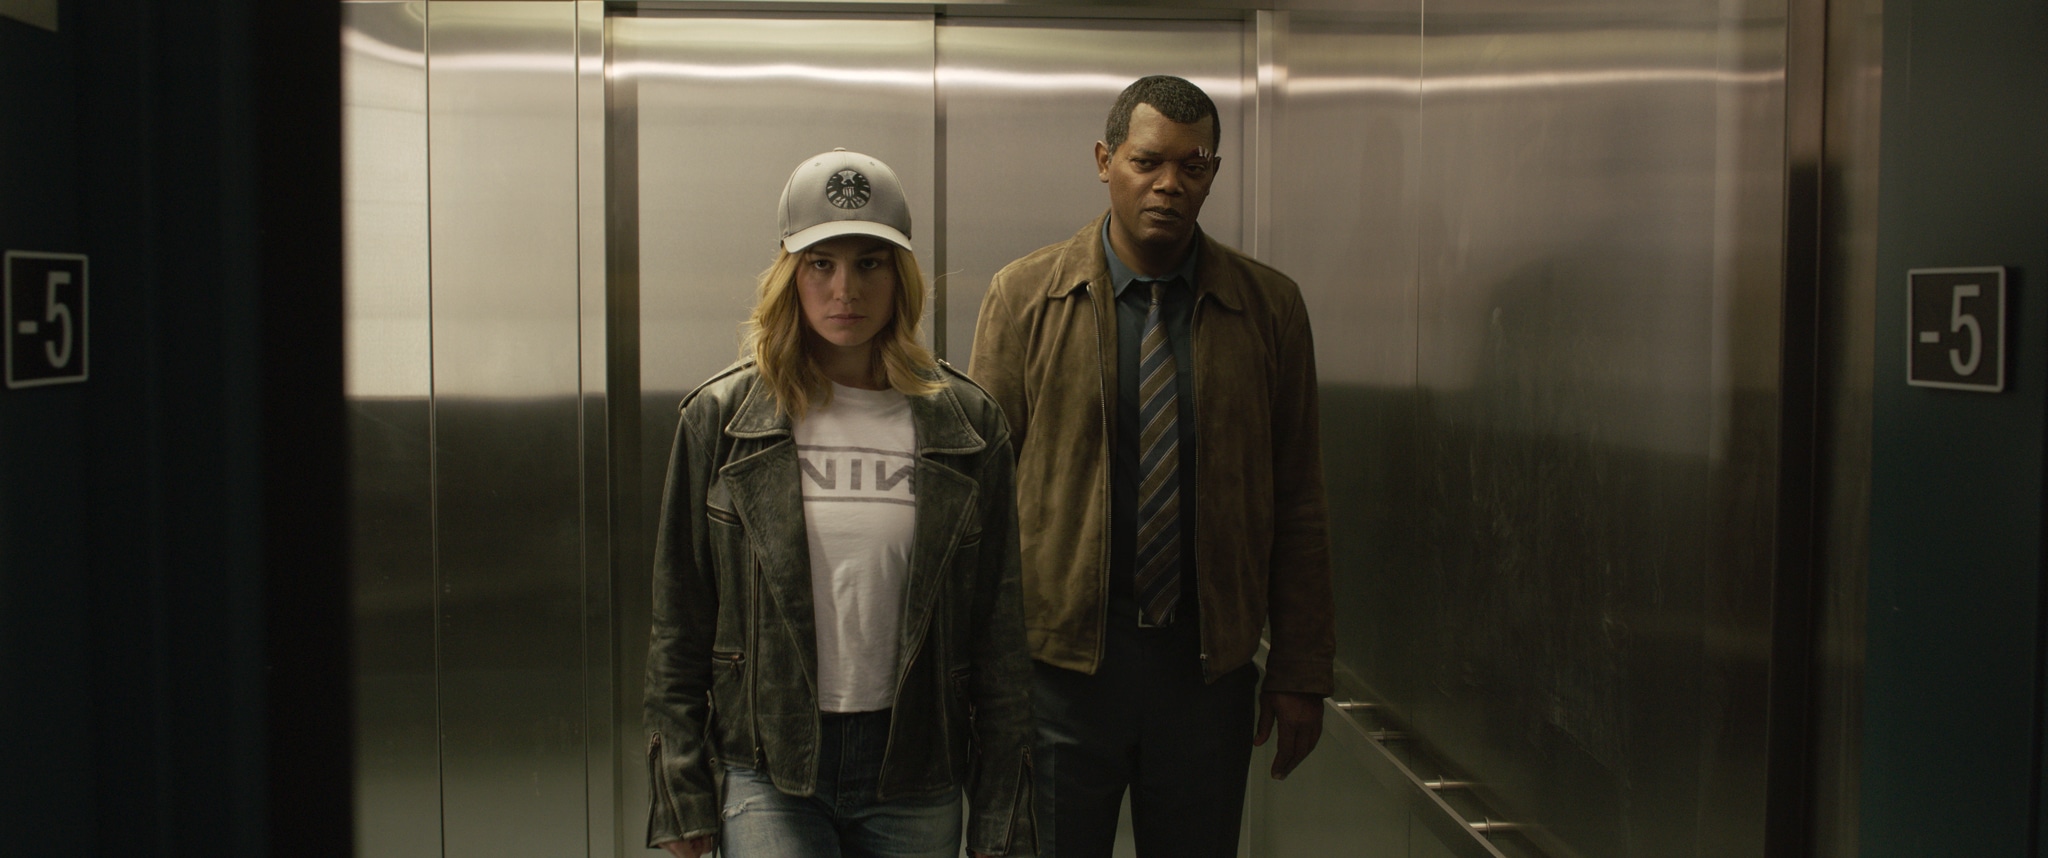 Samuel L. Jackson and Brie Larson as Nick Fury and Captain Marvel.